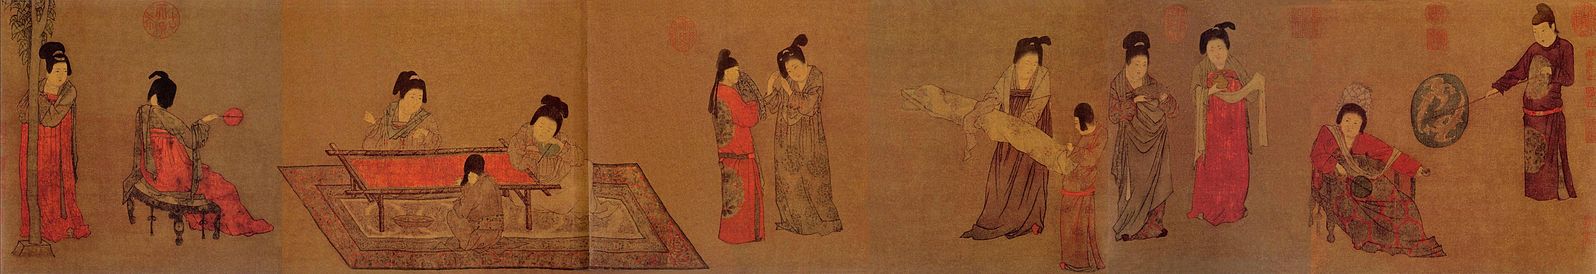 1596px-Zhou_Fang._Lady_With_Servants_(or_Lady_With_Fan)._(33,7x204,8)_Beijing_Palace_Museum.jpg